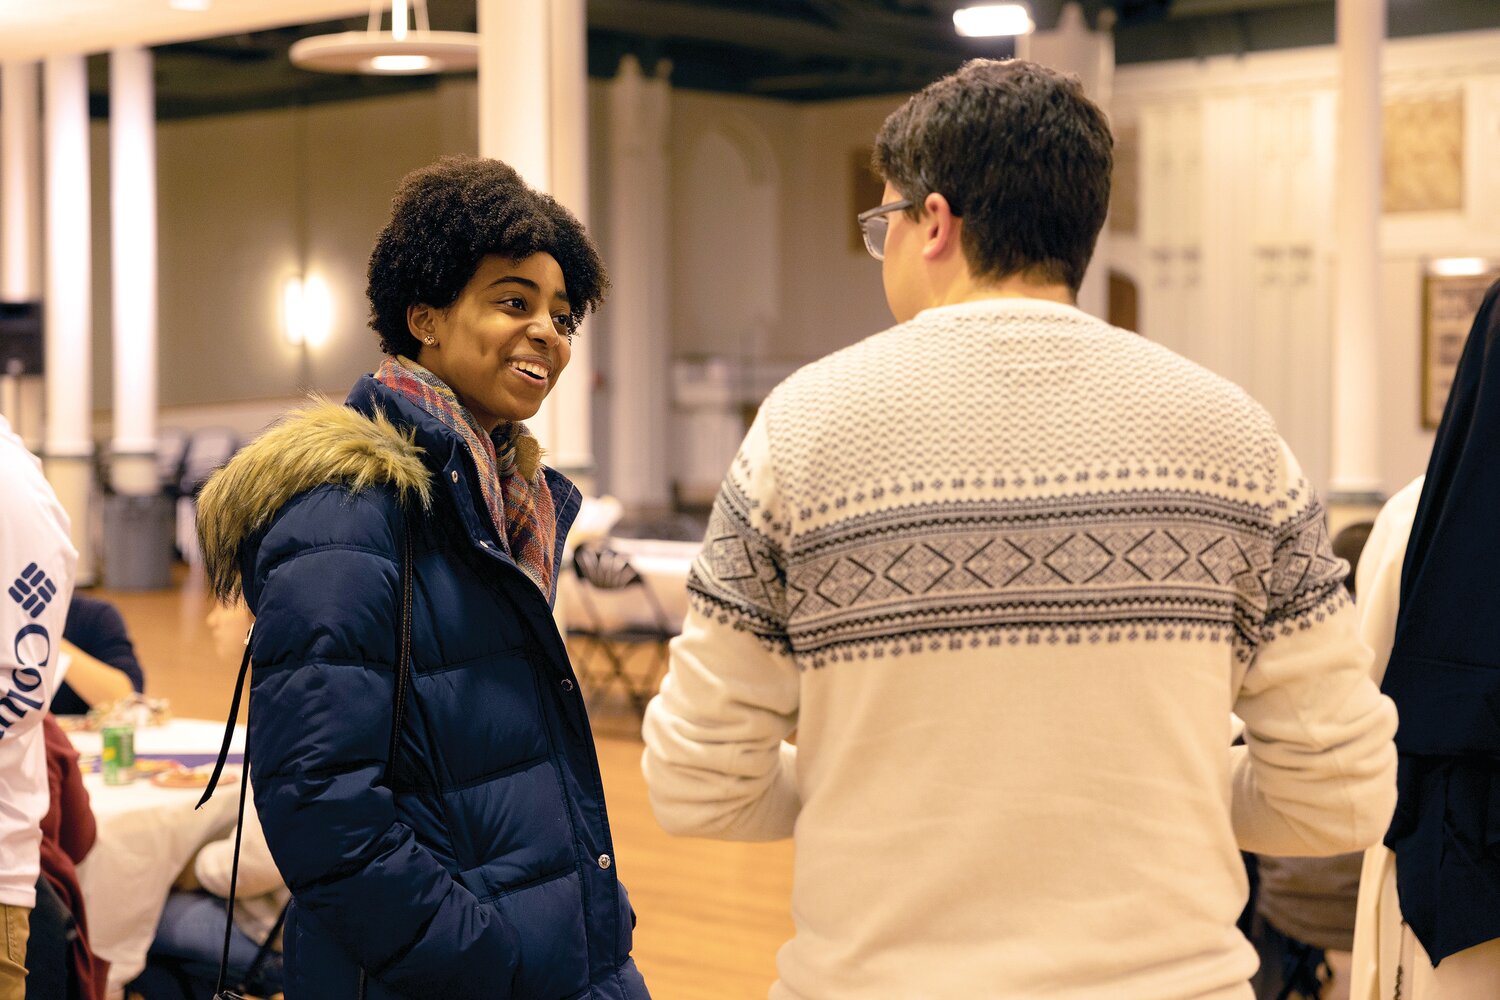 During the new First Fridays program, young adults find an authentic way to connect with Christ.